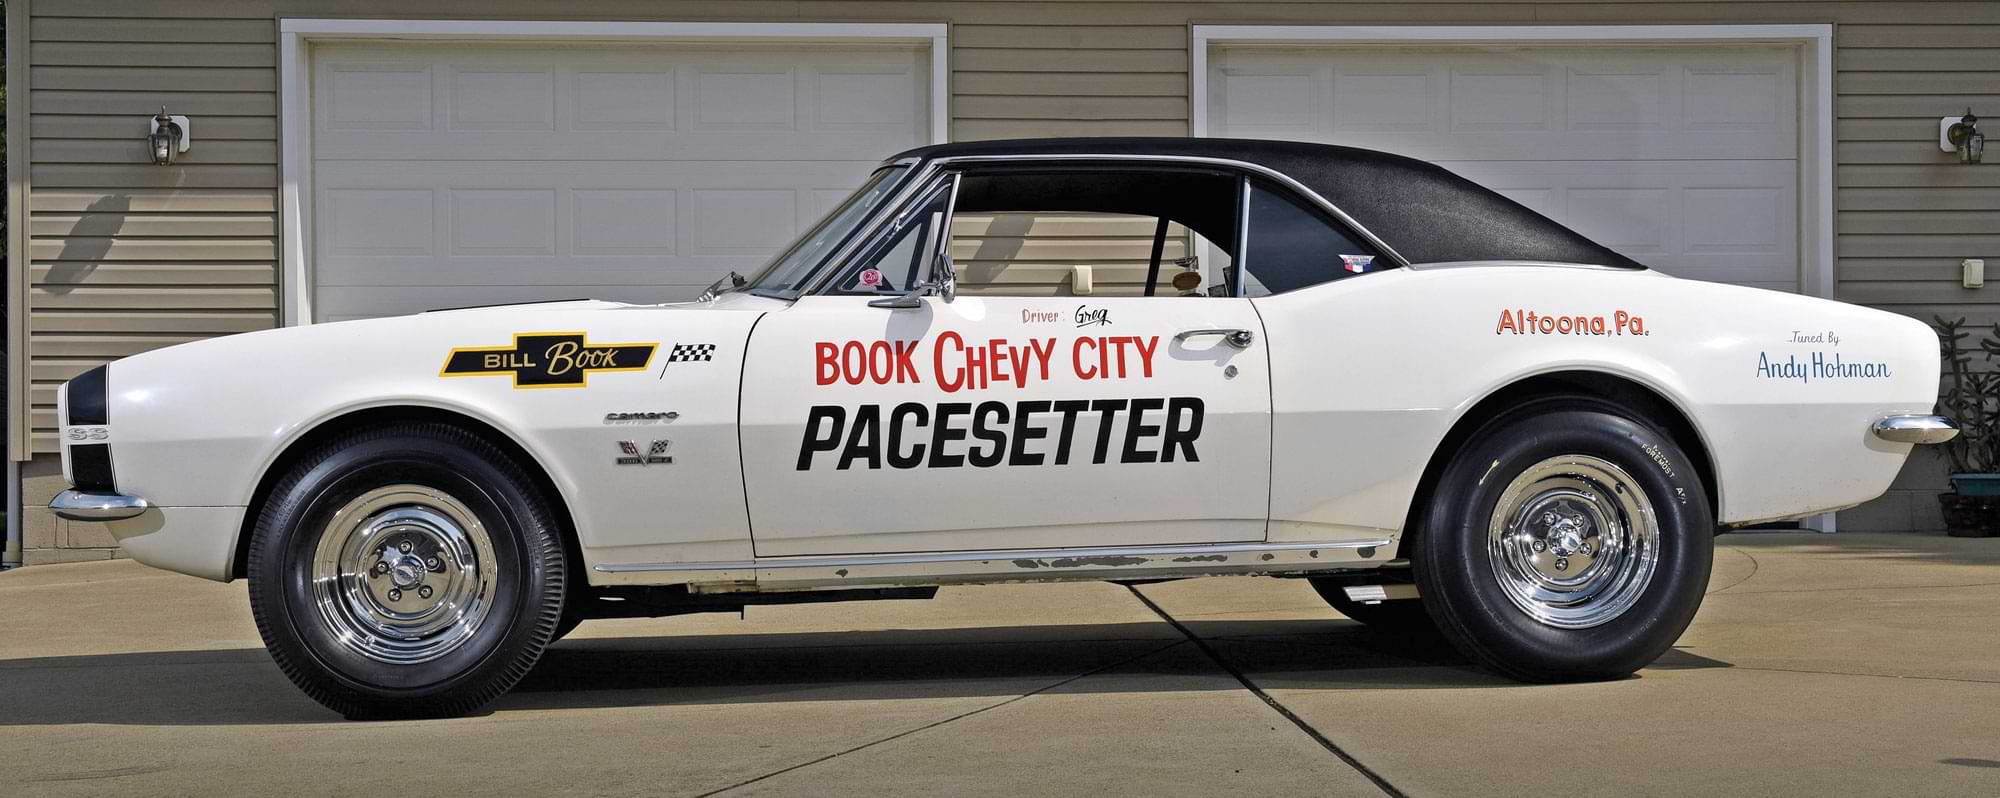 1967 Camaro L78 SS - ill Book Chevrolet Pacesetter